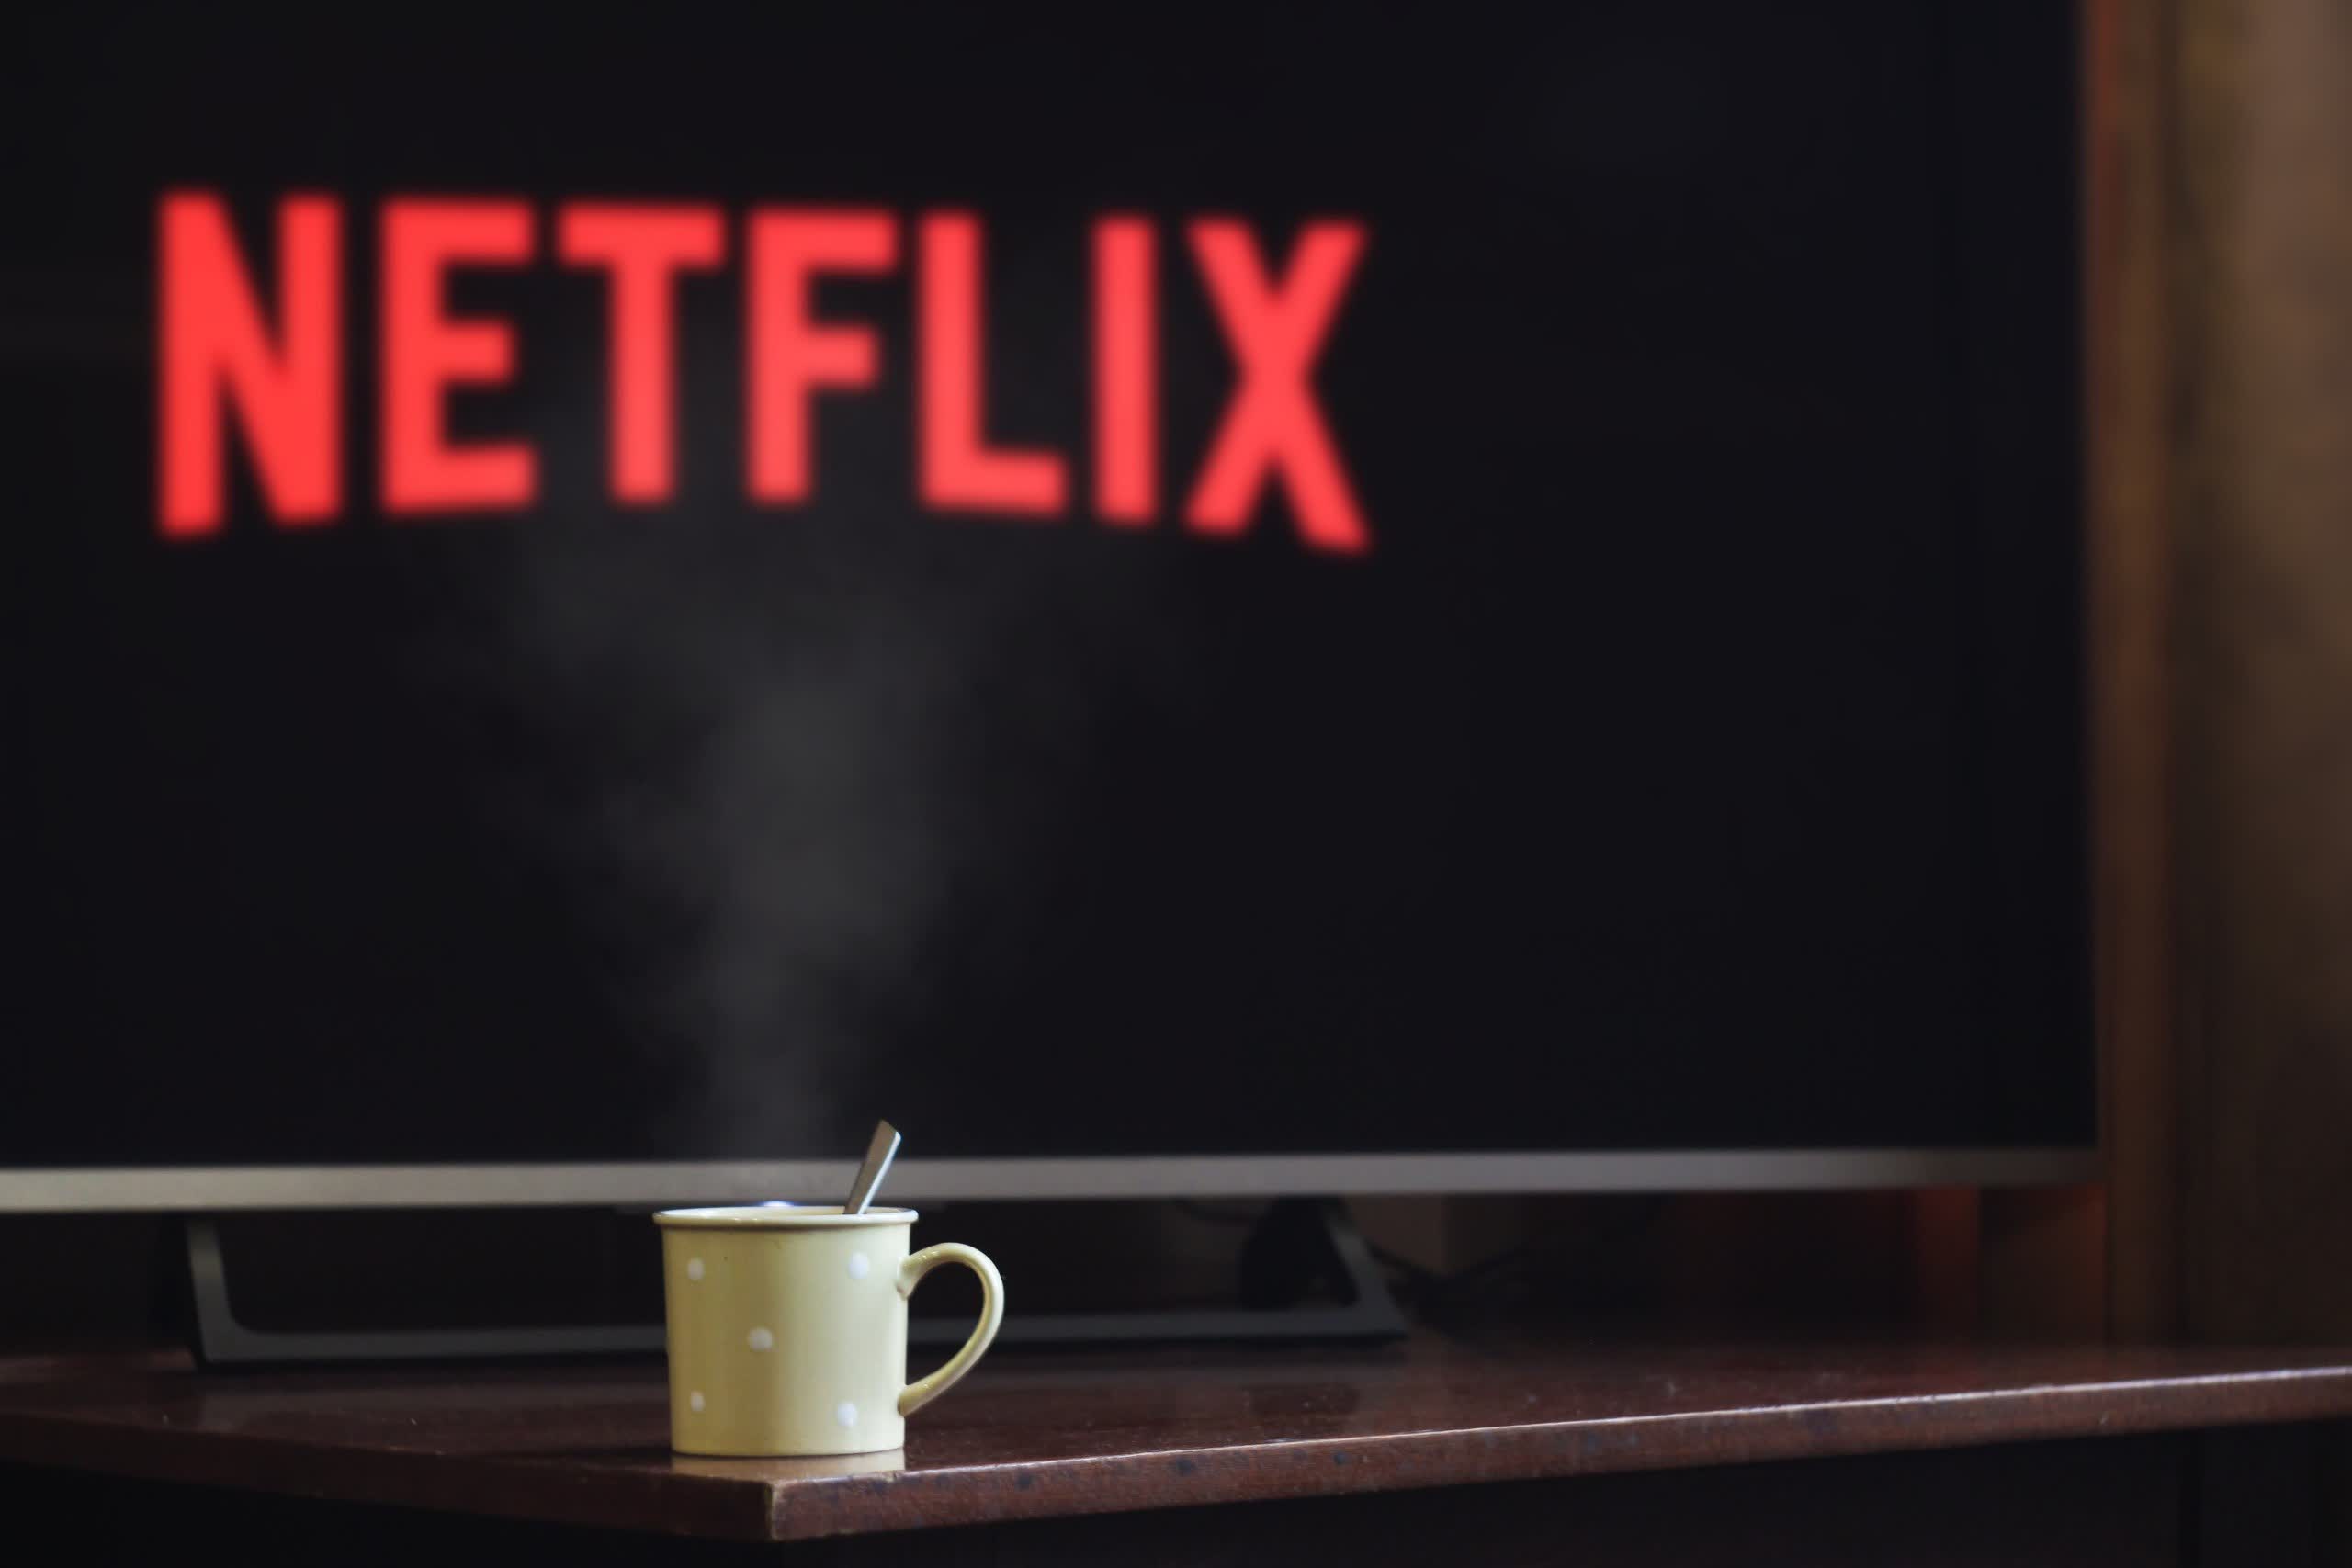 The UK says sharing Netflix passwords is illegal, could be criminal fraud